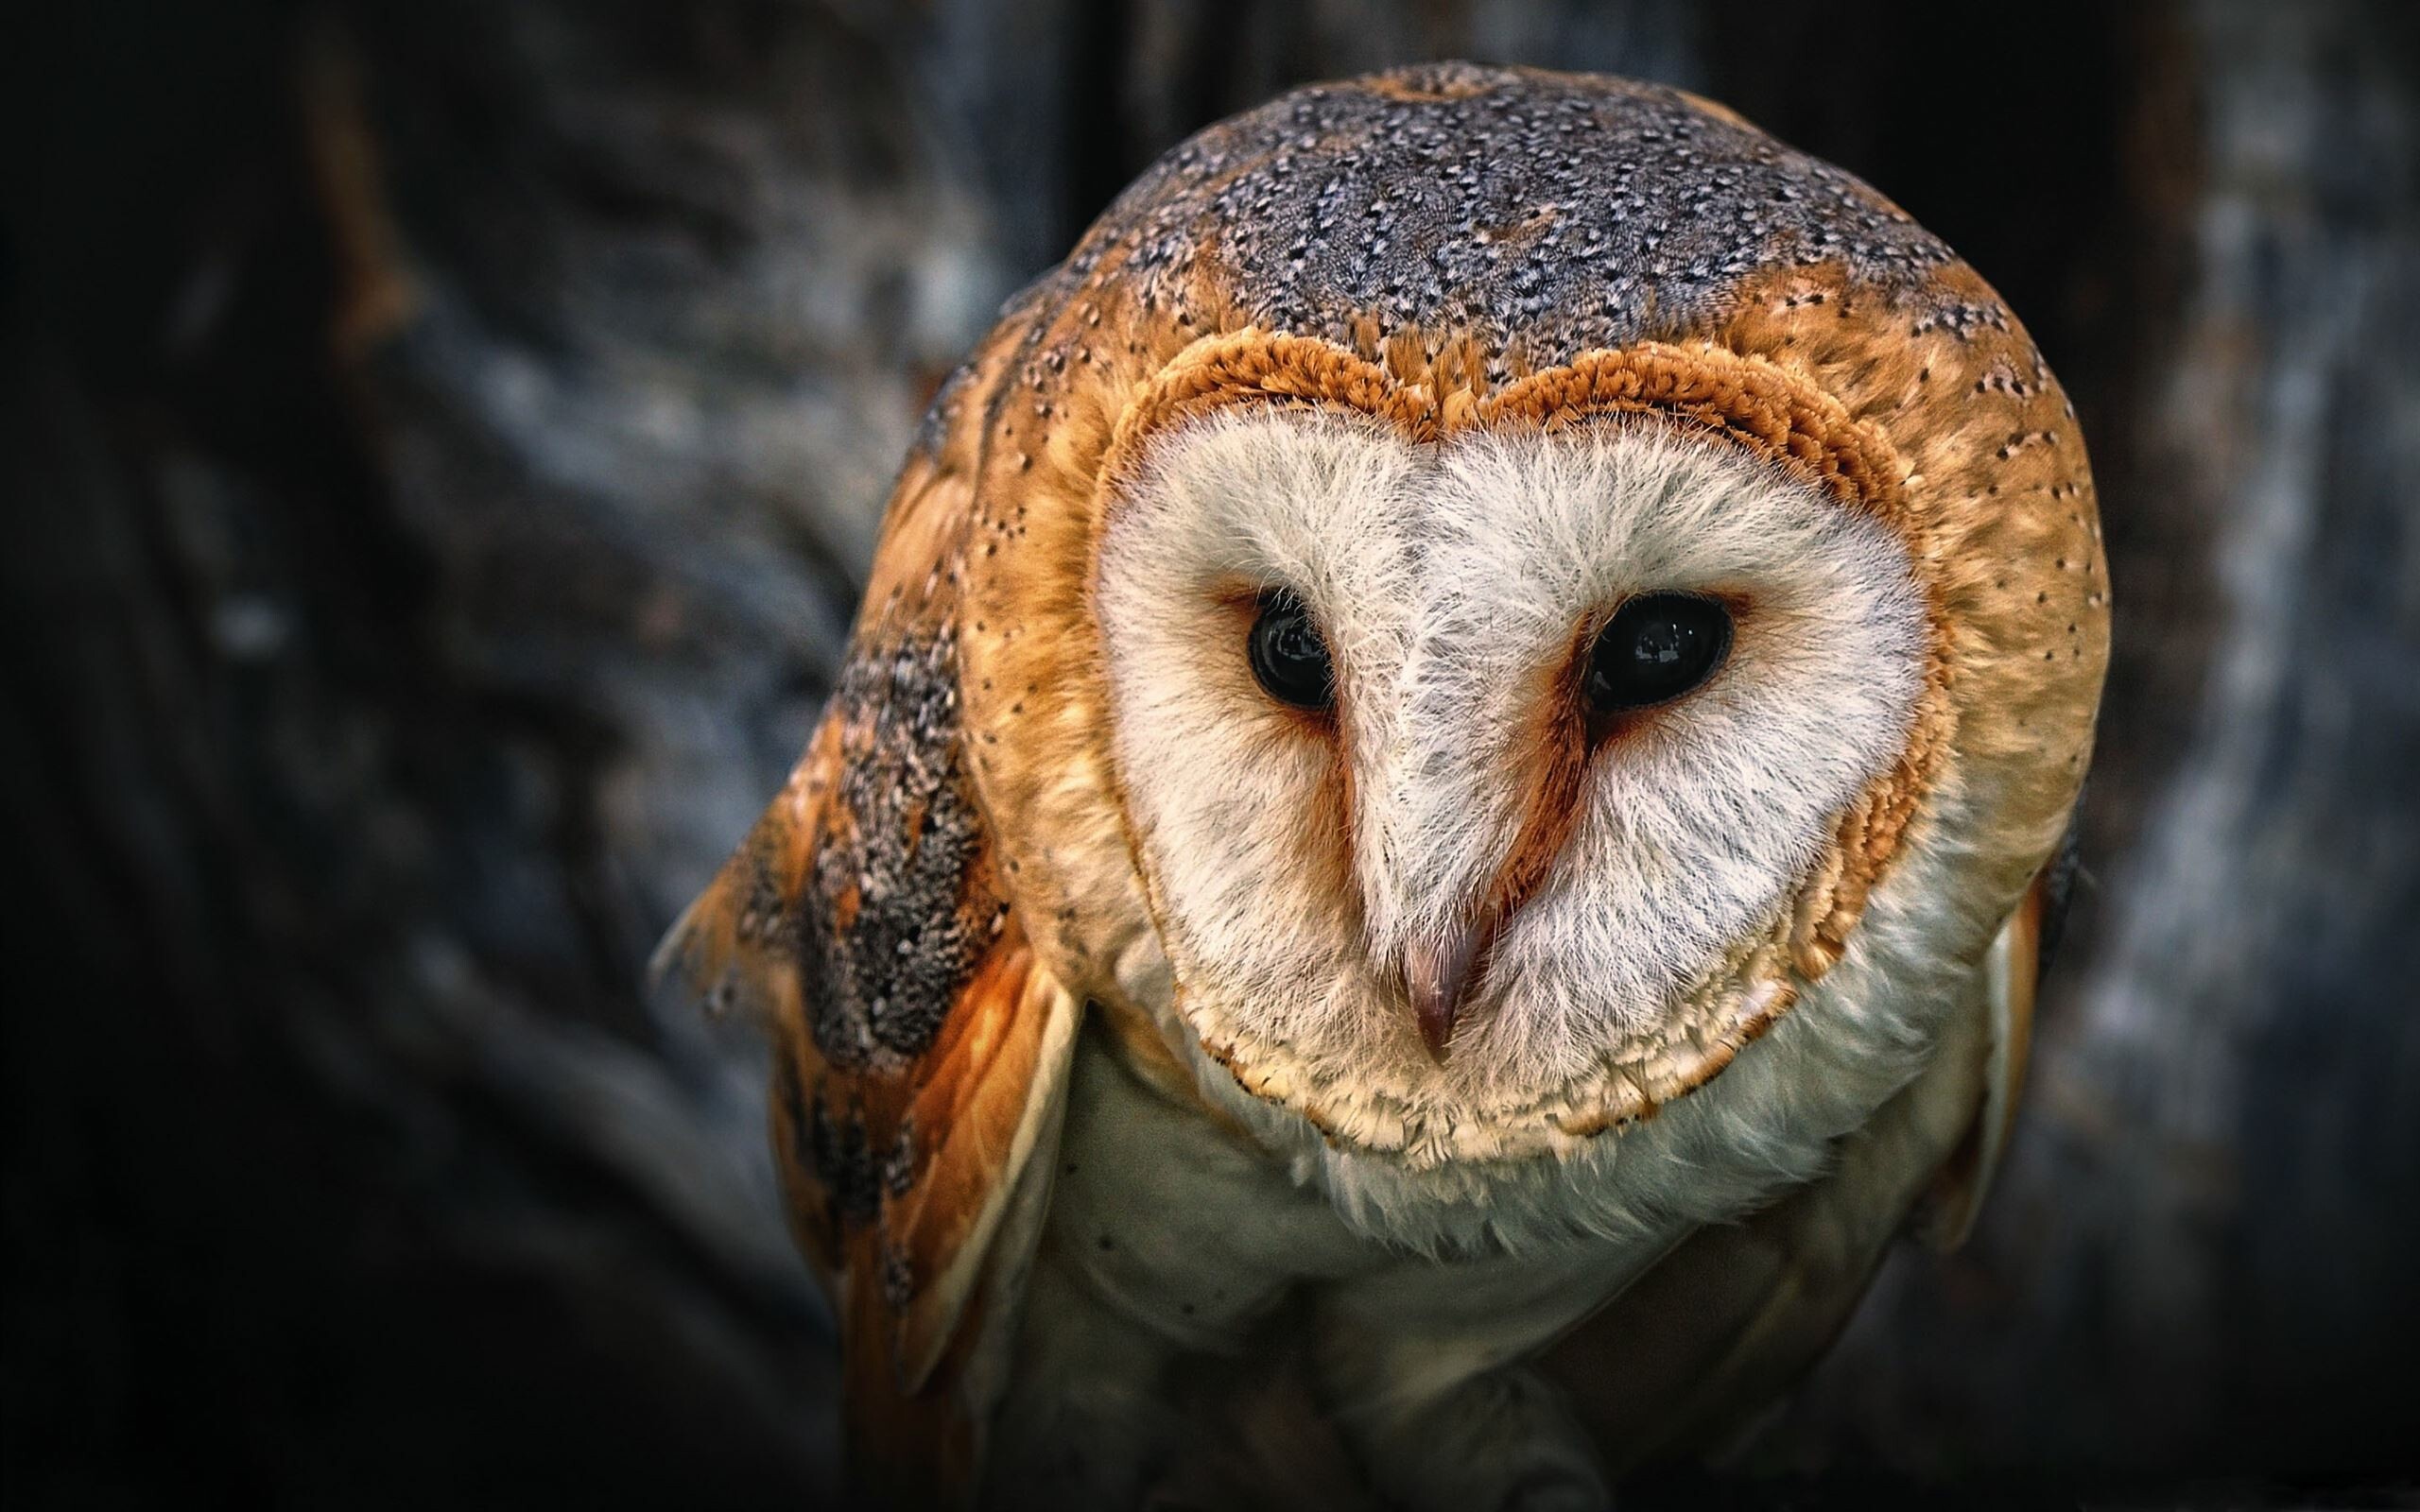 Owl: Most owls live a mainly nocturnal lifestyle and being able to fly without making any noise gives them a strong advantage over prey alert to the slightest sound in the night. 2560x1600 HD Background.